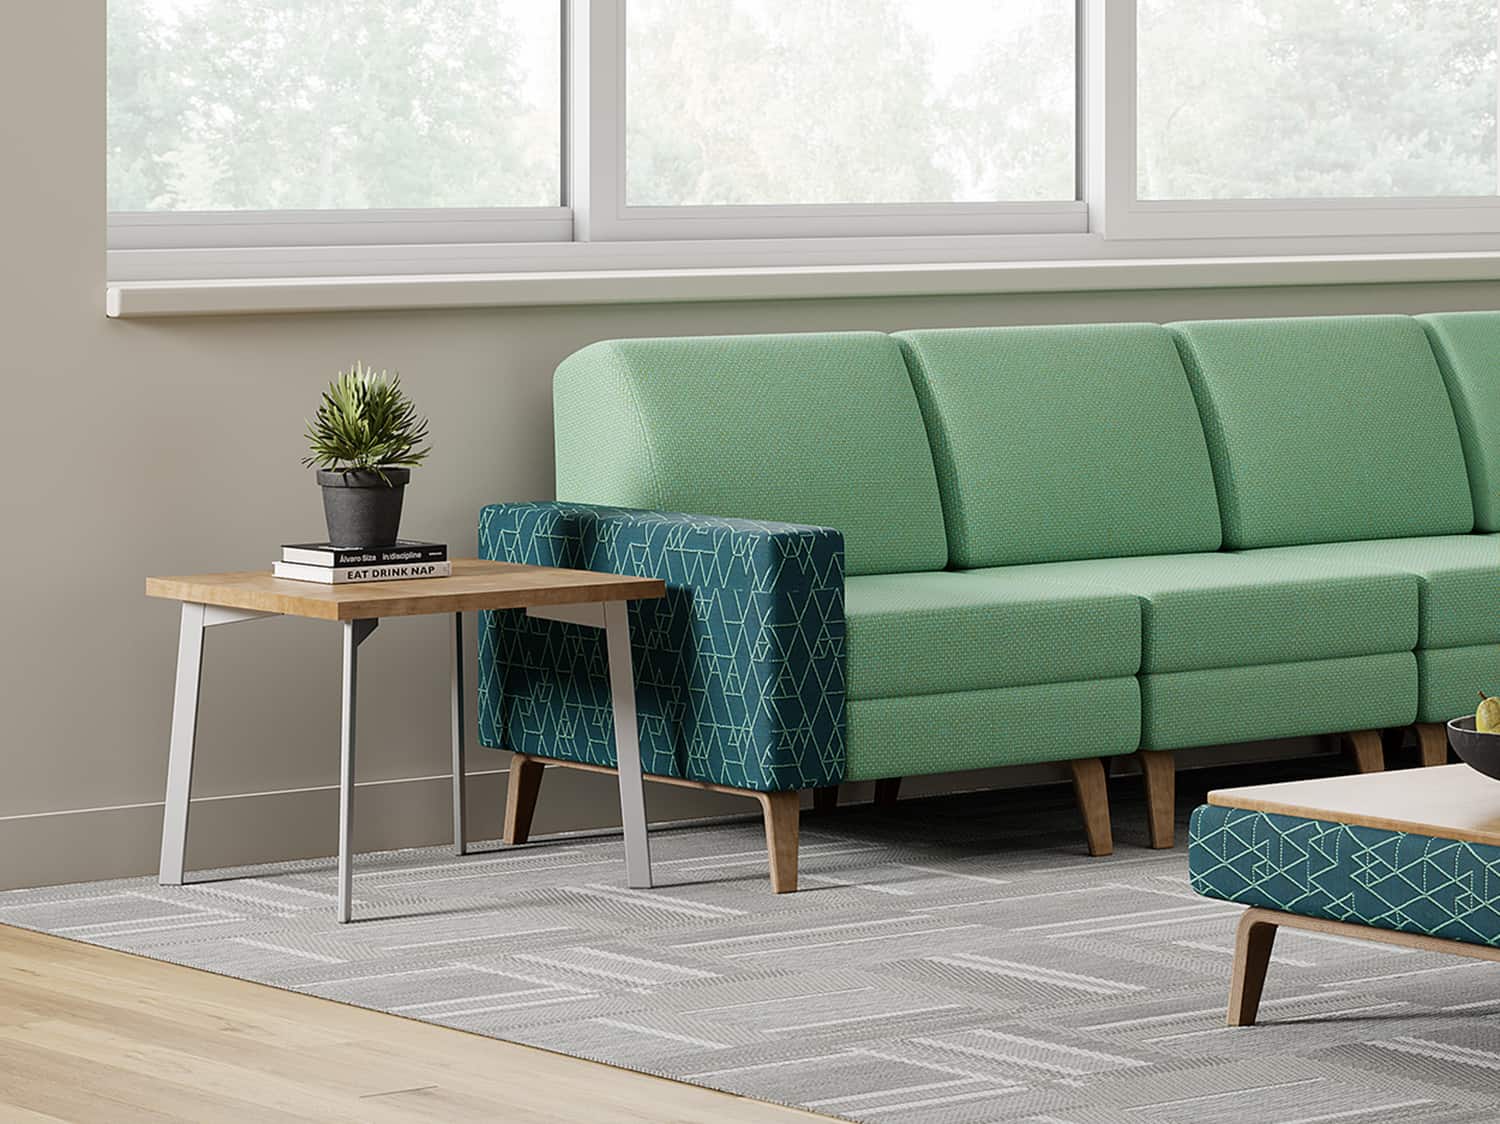 Sauder Education Dune End Table in Student Room with Chill Modular Seating